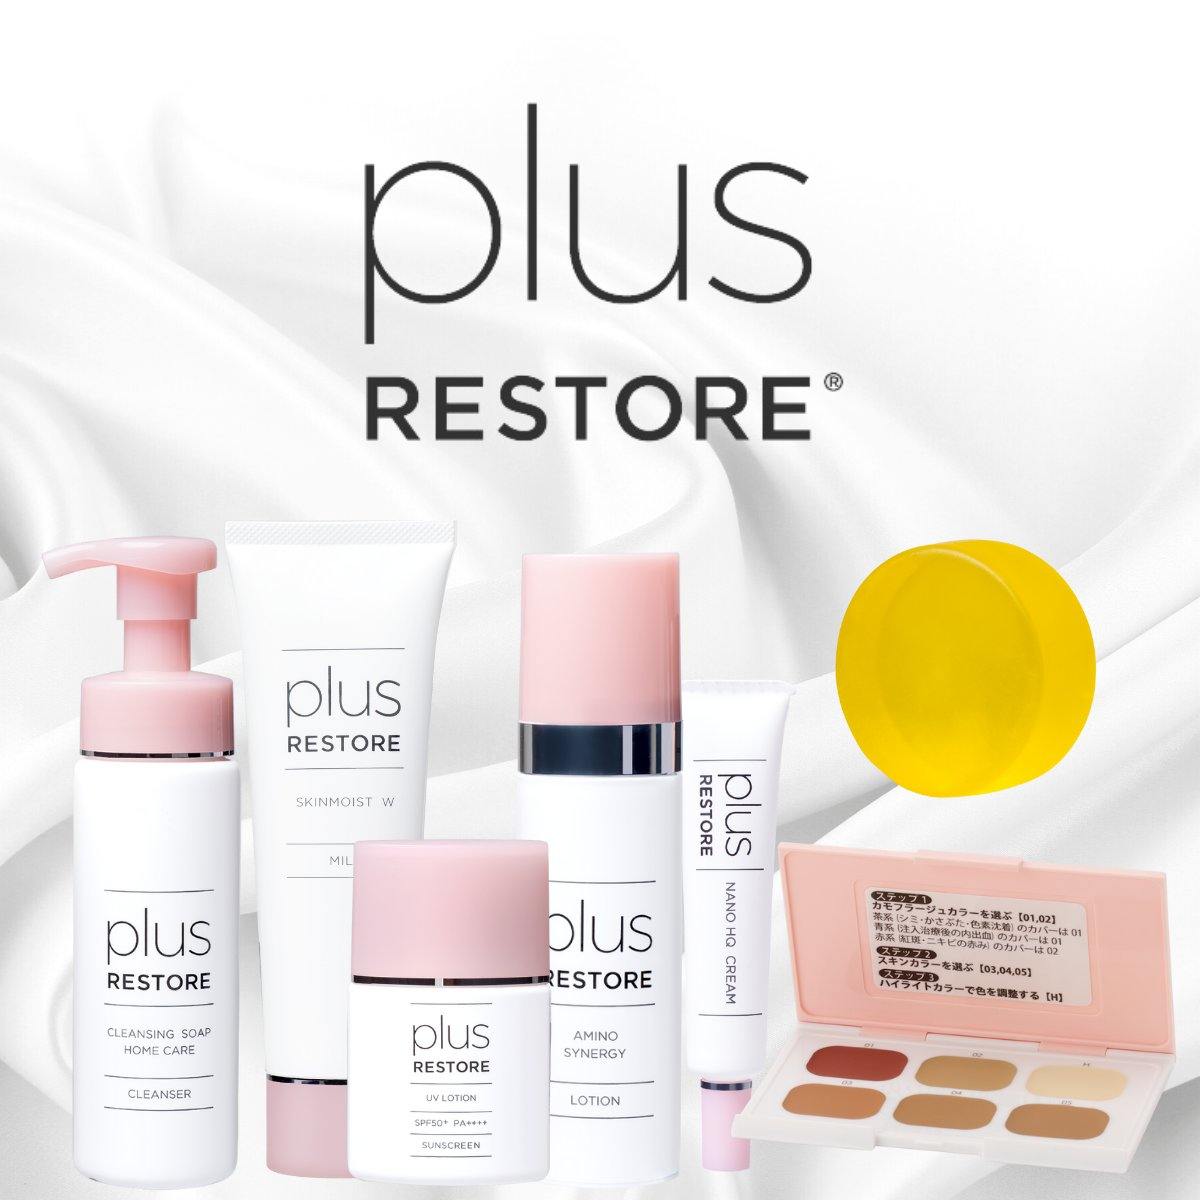 plus RESTORE - From DR